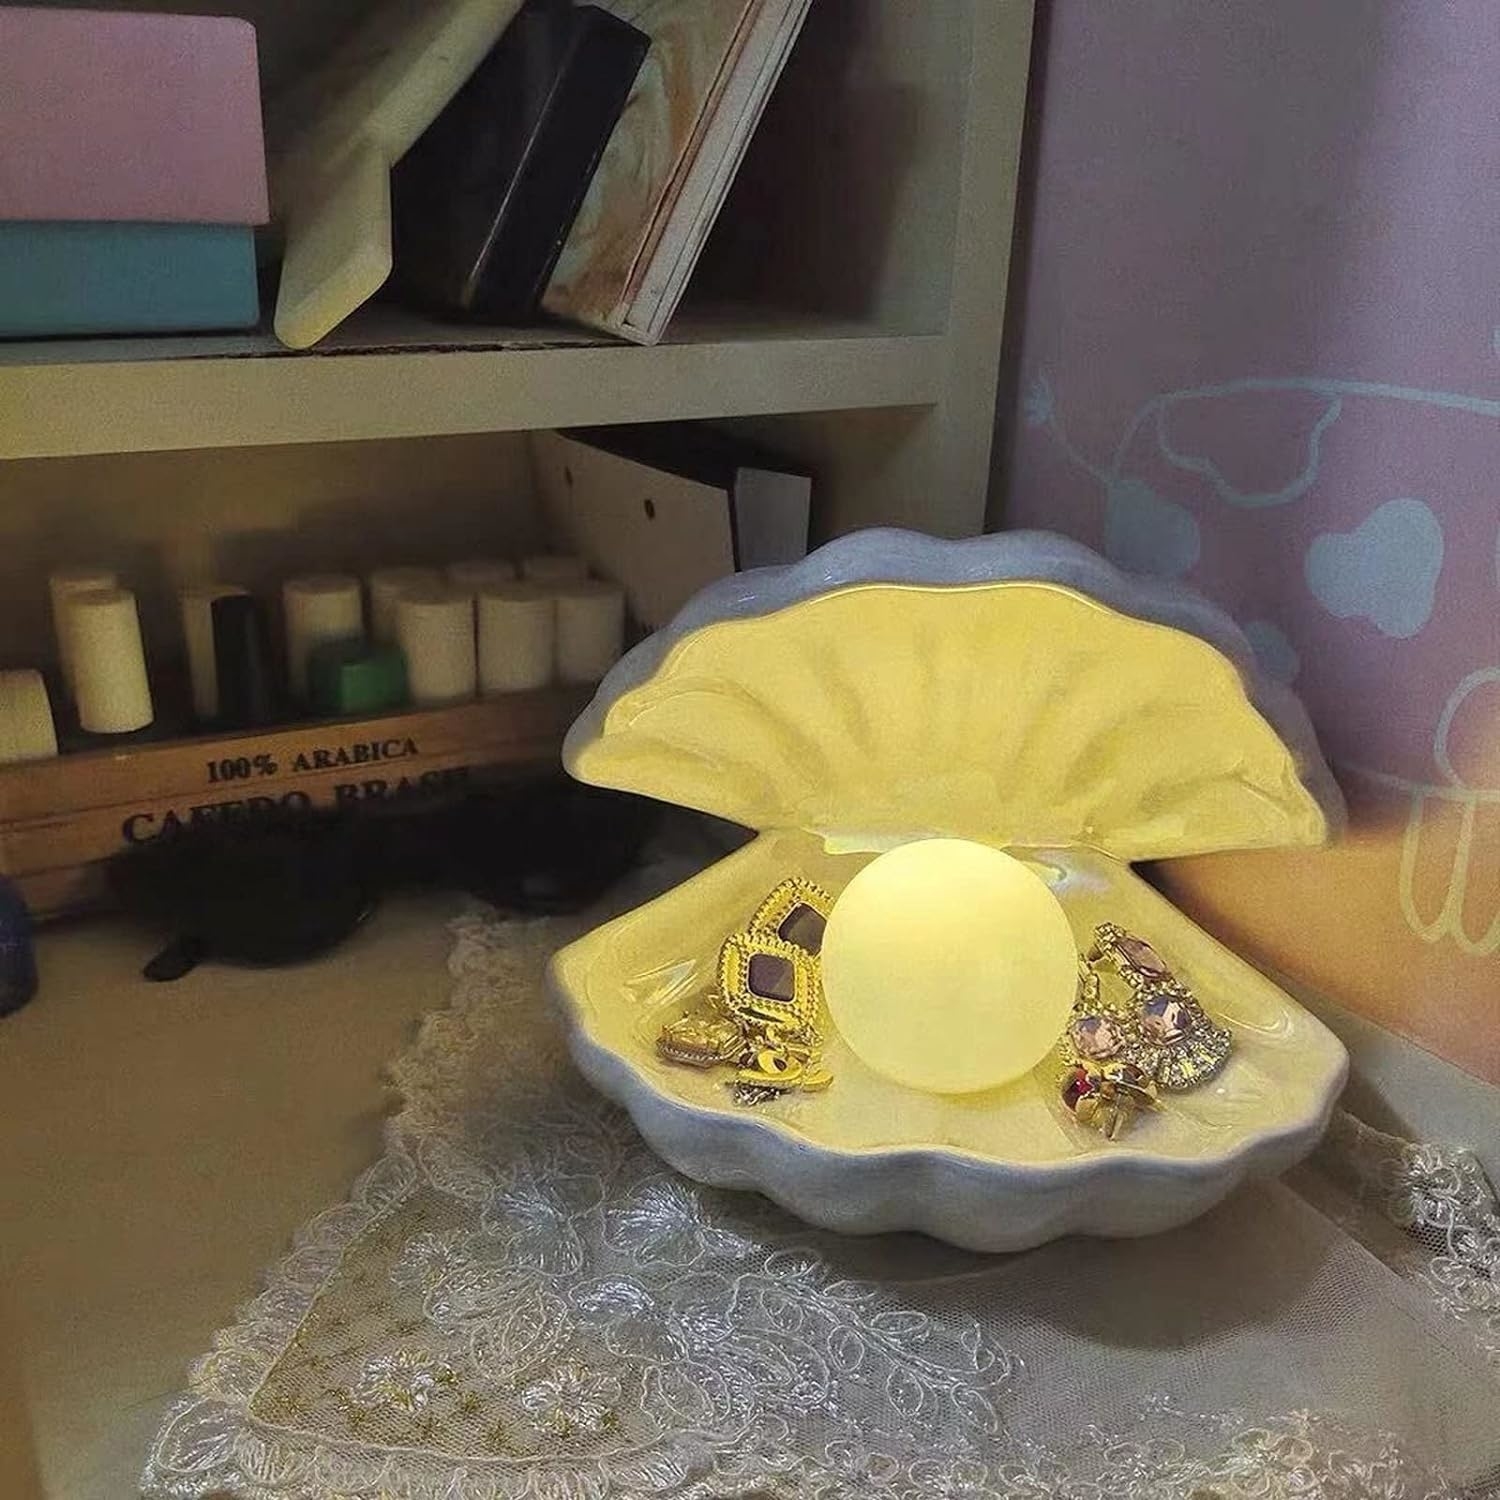 A shell-shaped jewelry dish with assorted jewelry and a spherical lamp, placed on a table with books in the background